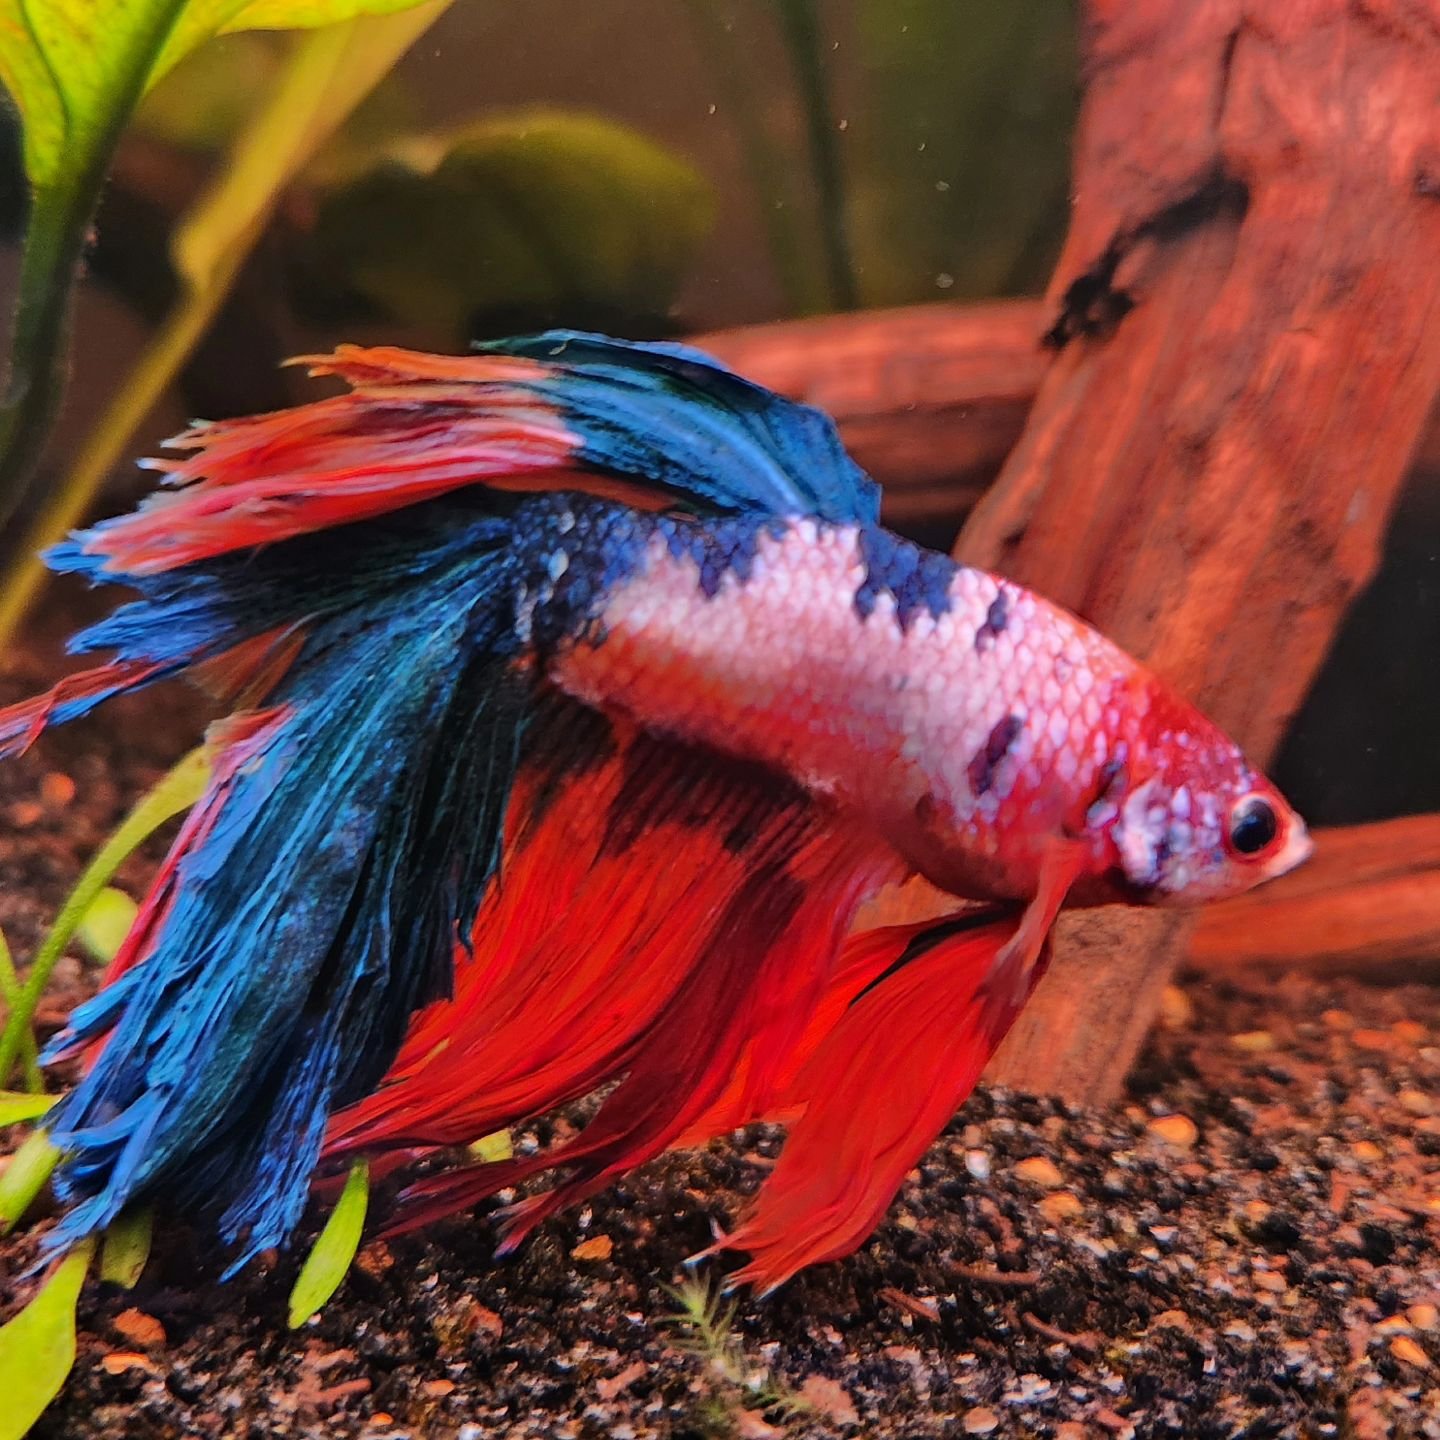 Poor little Winter Biscuit, you were only with us for a short time, but your personality -- and your brilliant colors -- won us over. You were a living work of art, your colors will make the rainbow bridge brighter. Rest in peace, little buddy.